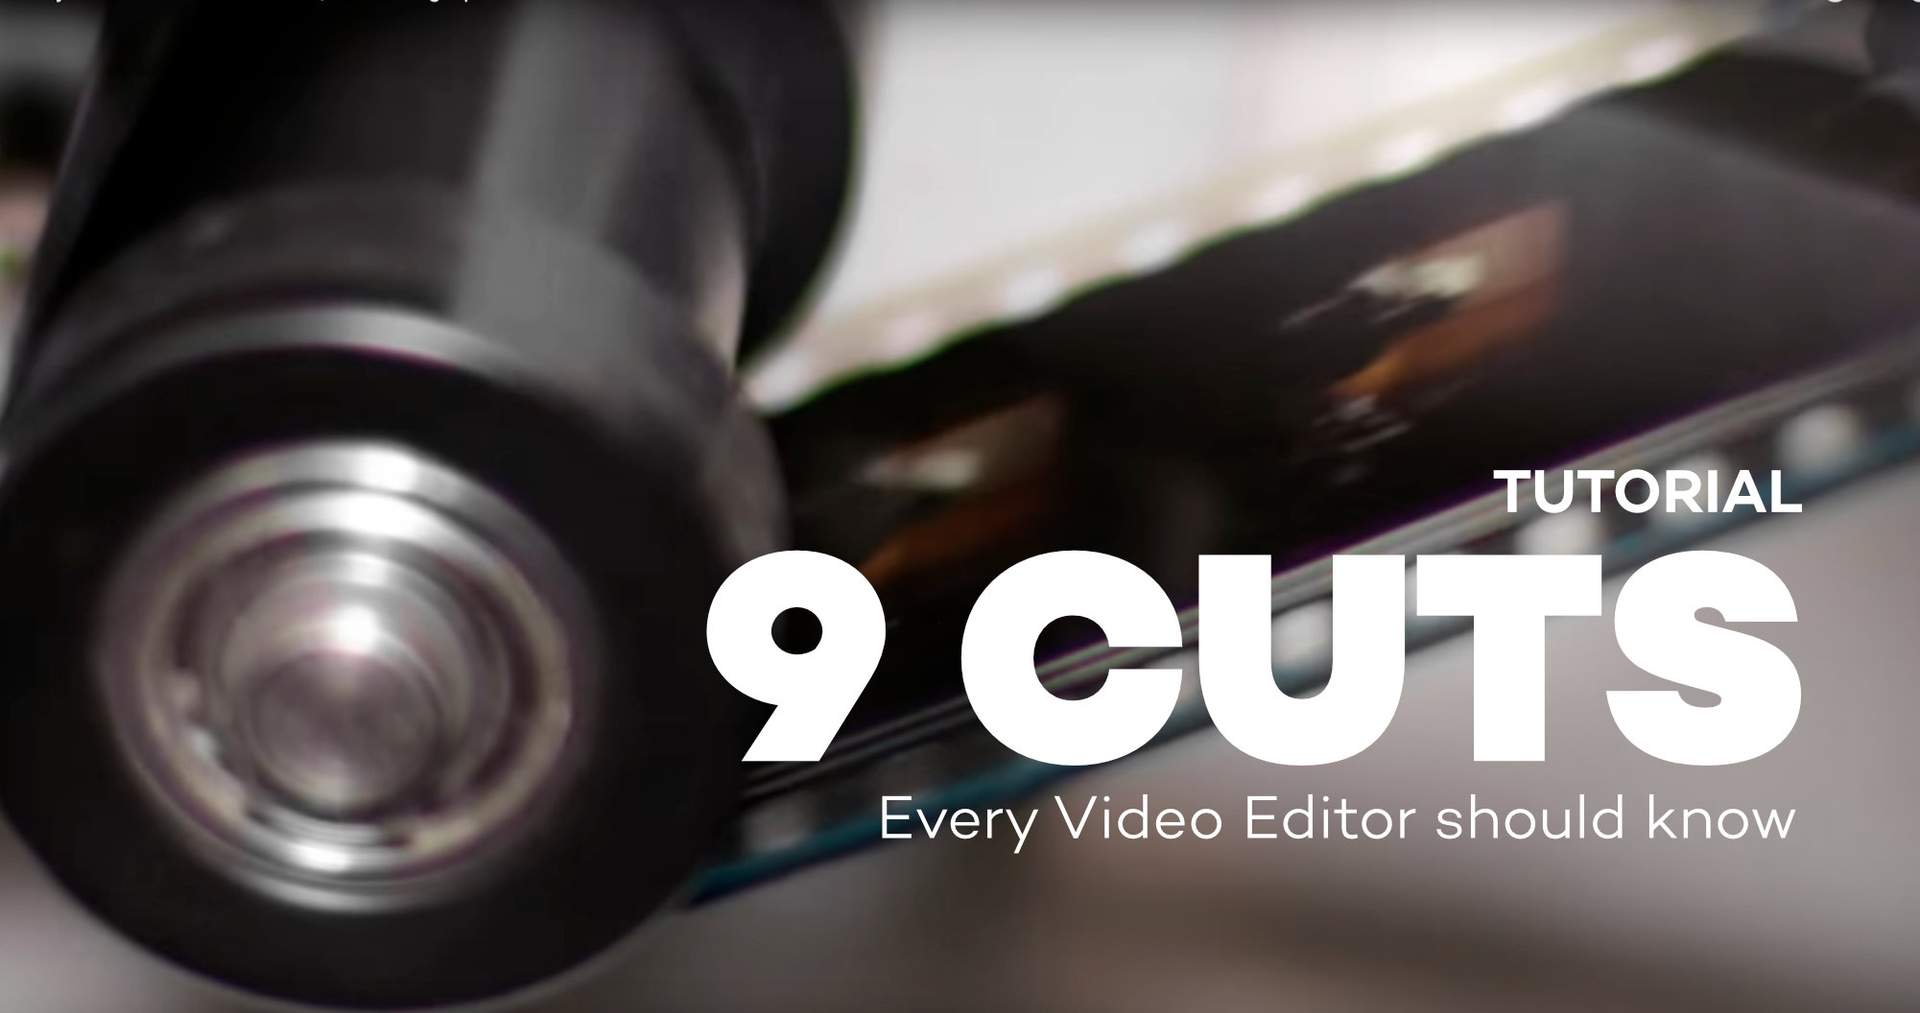 9 Cuts every video editor should know